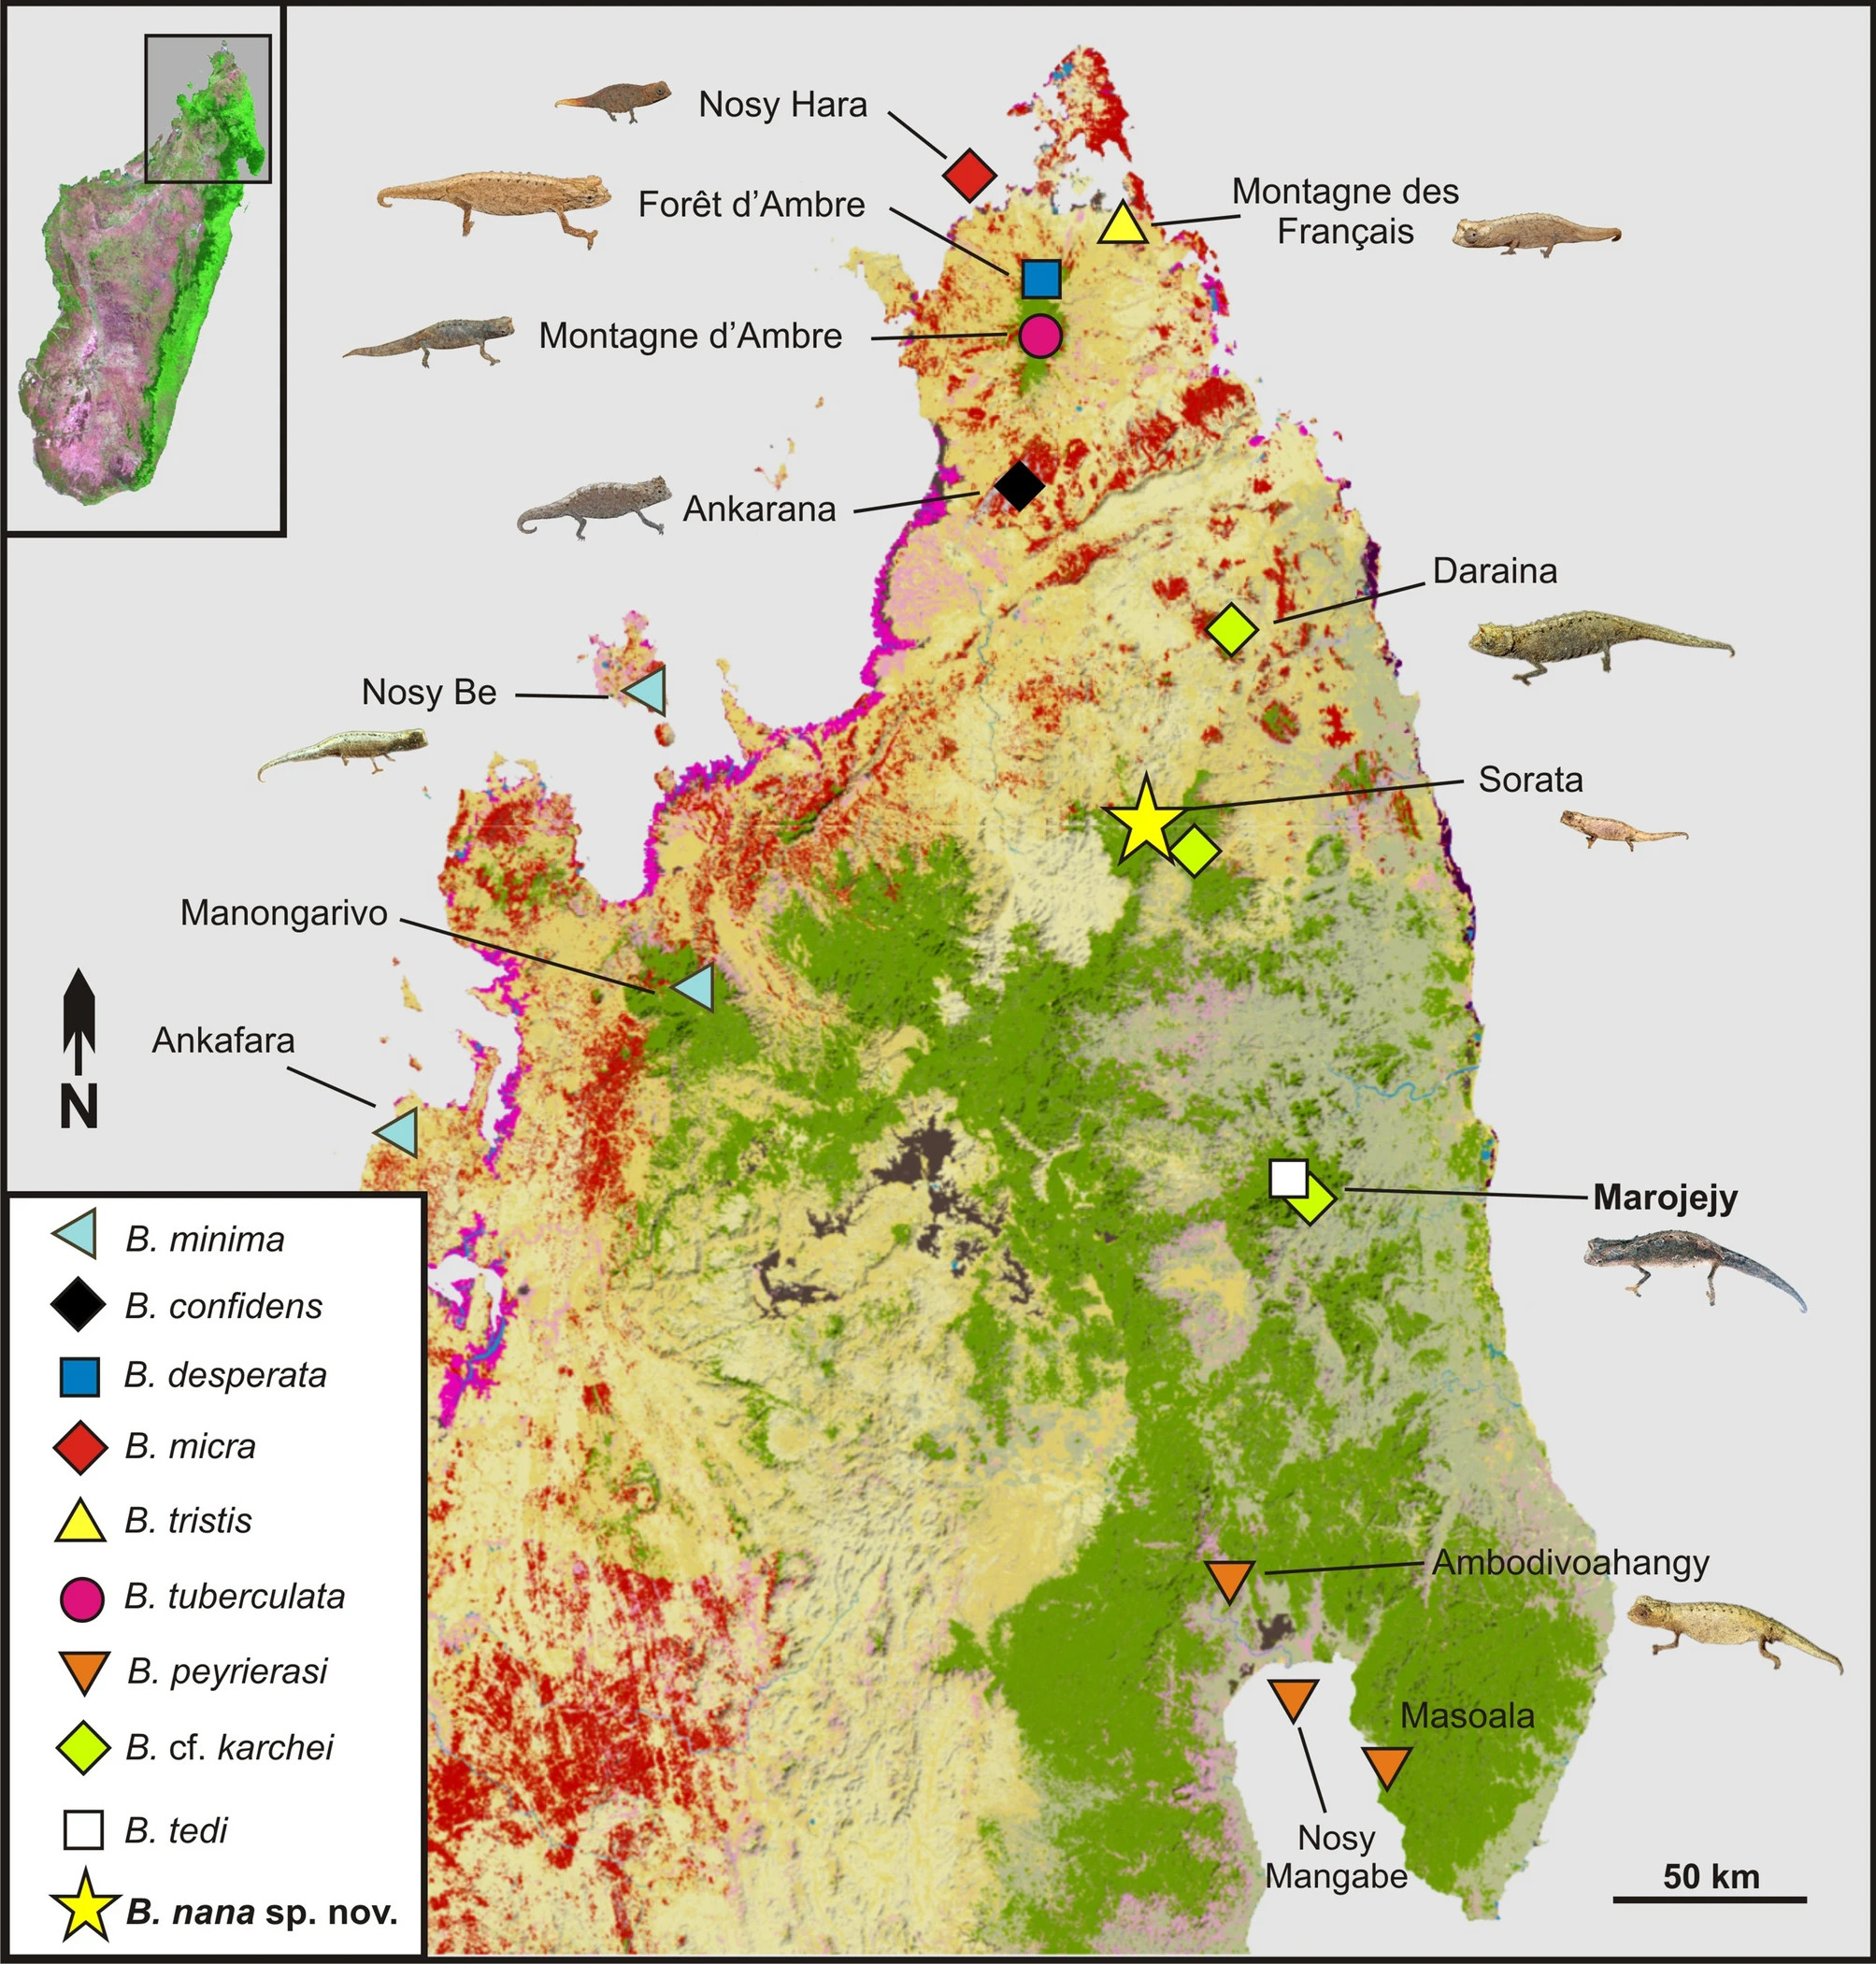  A spread of Brookesia species in Northern Madagascar. (Graphic: Glaw et al. 2021, Other)